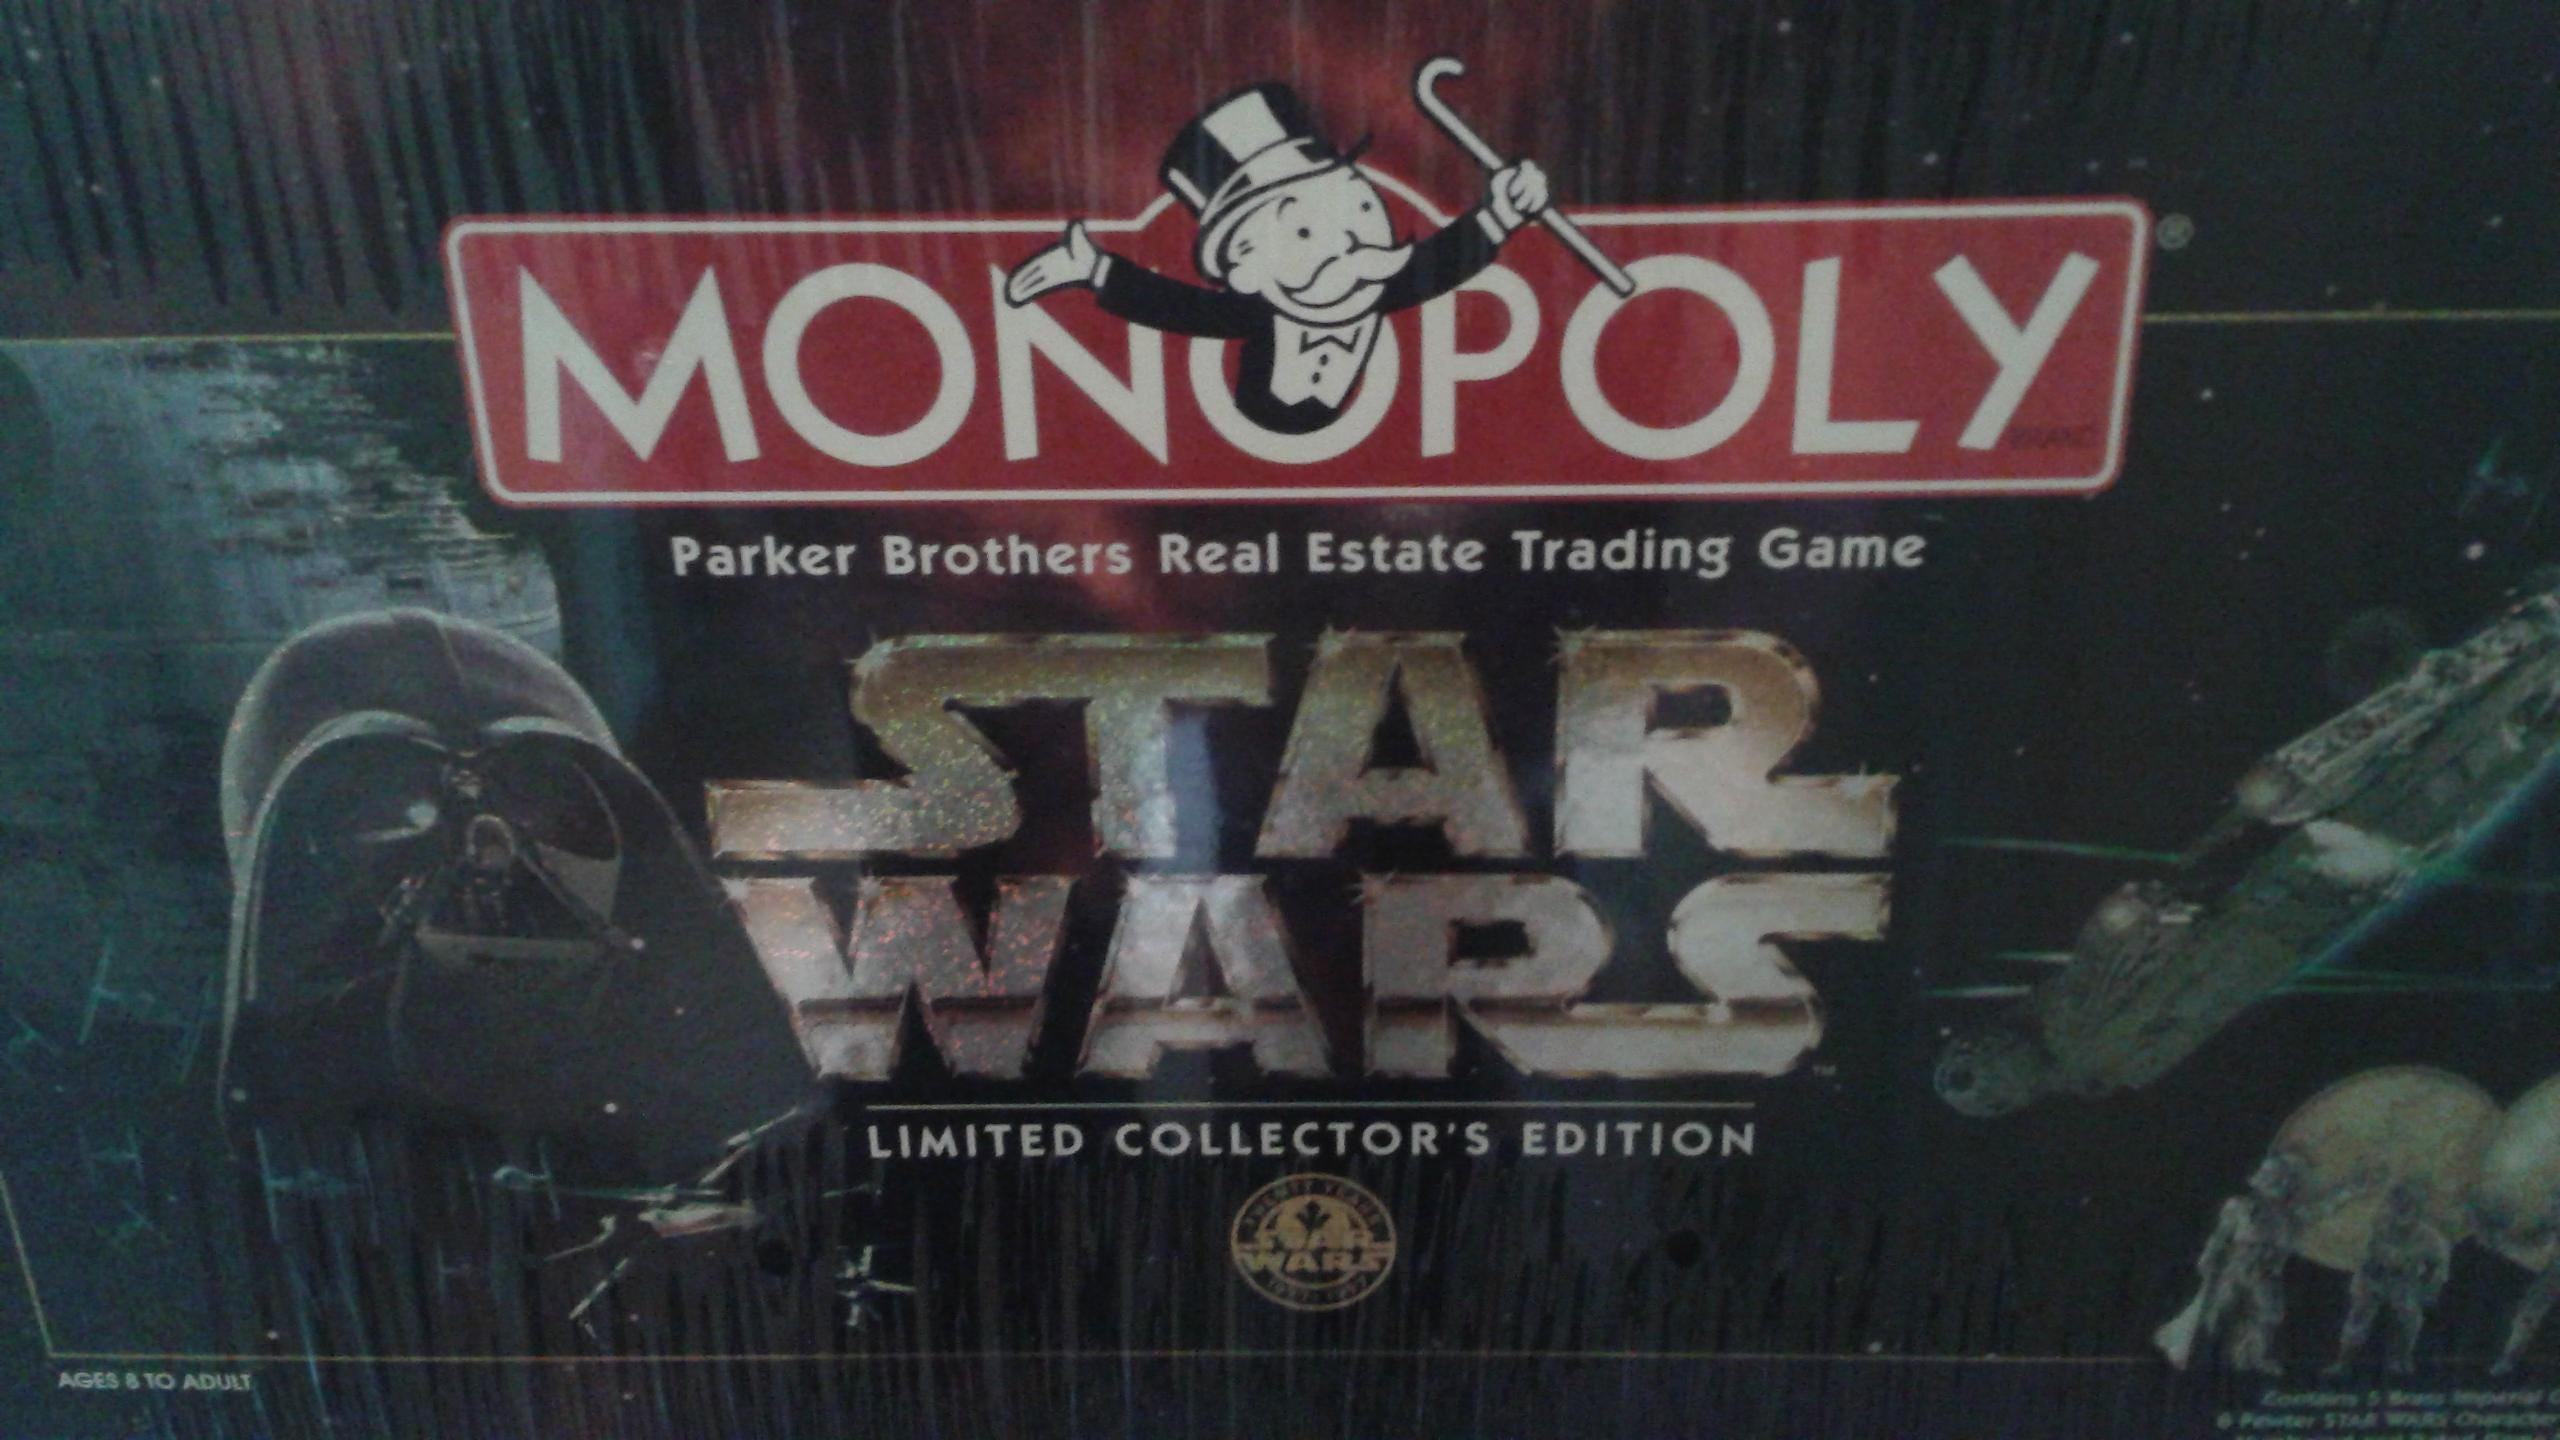 40786 for sale online Parker Brothers Monopoly 1996 Limited Collectors Edition 20th Anniversary Complete Game 